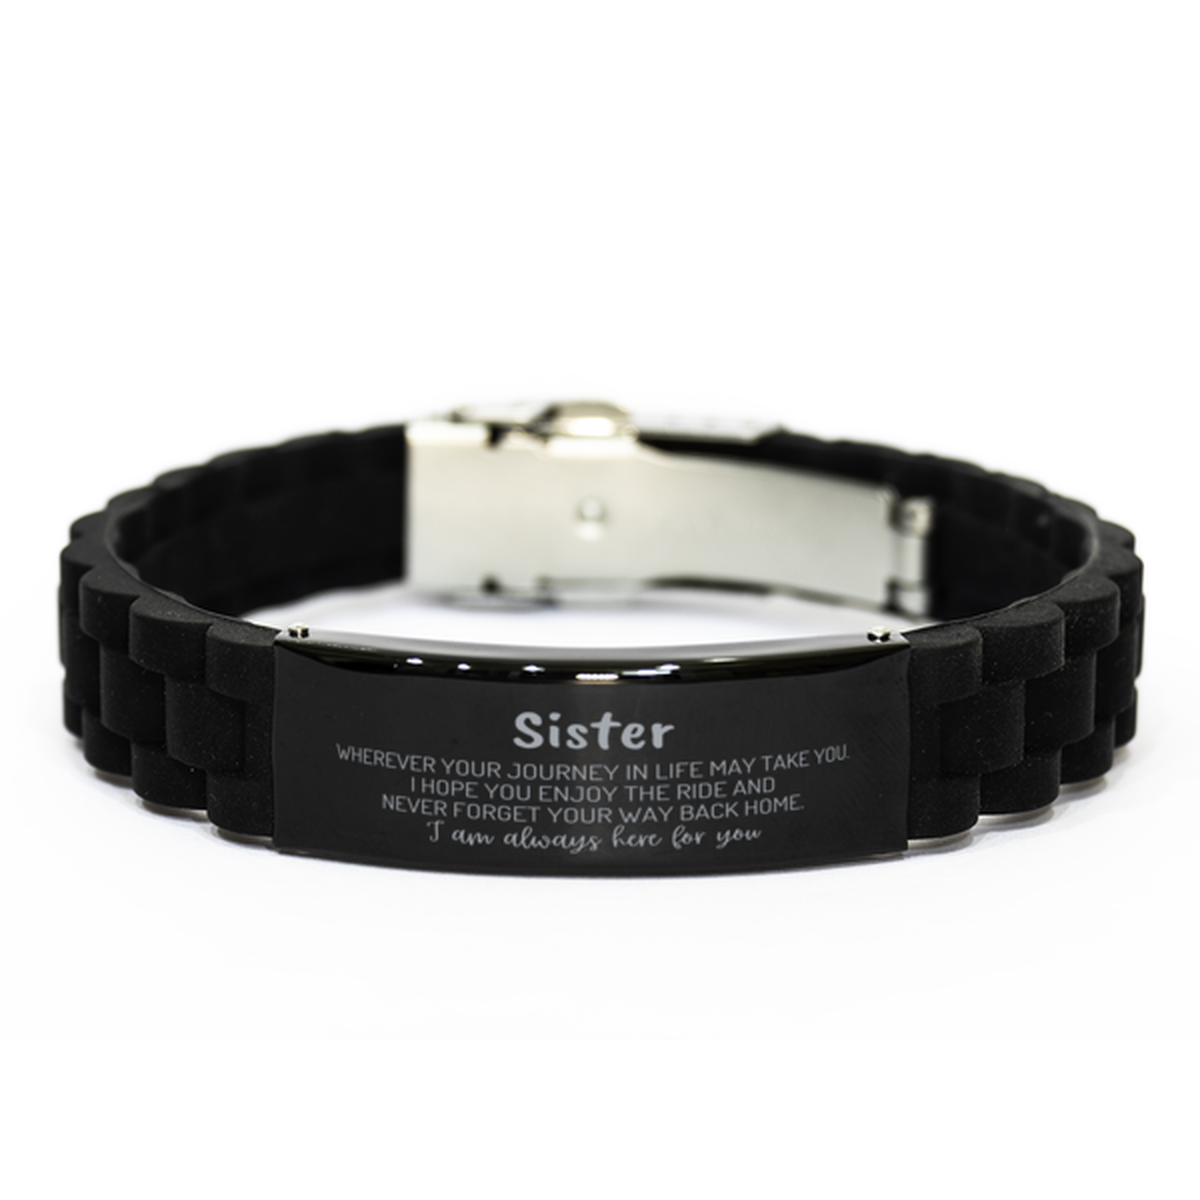 Sister wherever your journey in life may take you, I am always here for you Sister Black Glidelock Clasp Bracelet, Awesome Christmas Gifts For Sister, Sister Birthday Gifts for Men Women Family Loved One